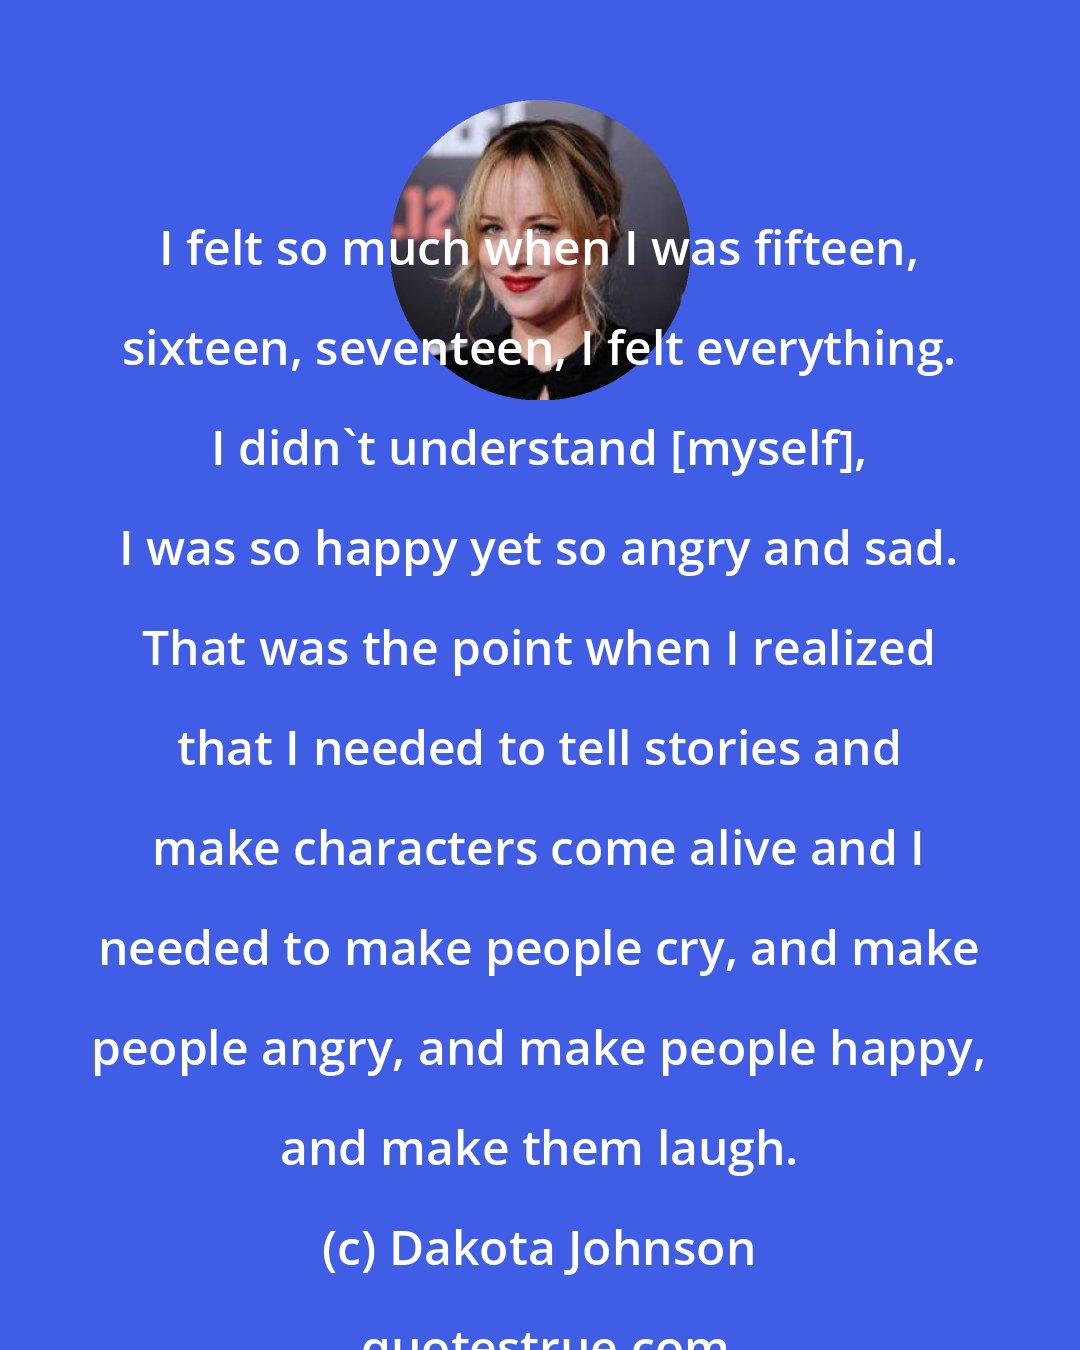 Dakota Johnson: I felt so much when I was fifteen, sixteen, seventeen, I felt everything. I didn't understand [myself], I was so happy yet so angry and sad. That was the point when I realized that I needed to tell stories and make characters come alive and I needed to make people cry, and make people angry, and make people happy, and make them laugh.